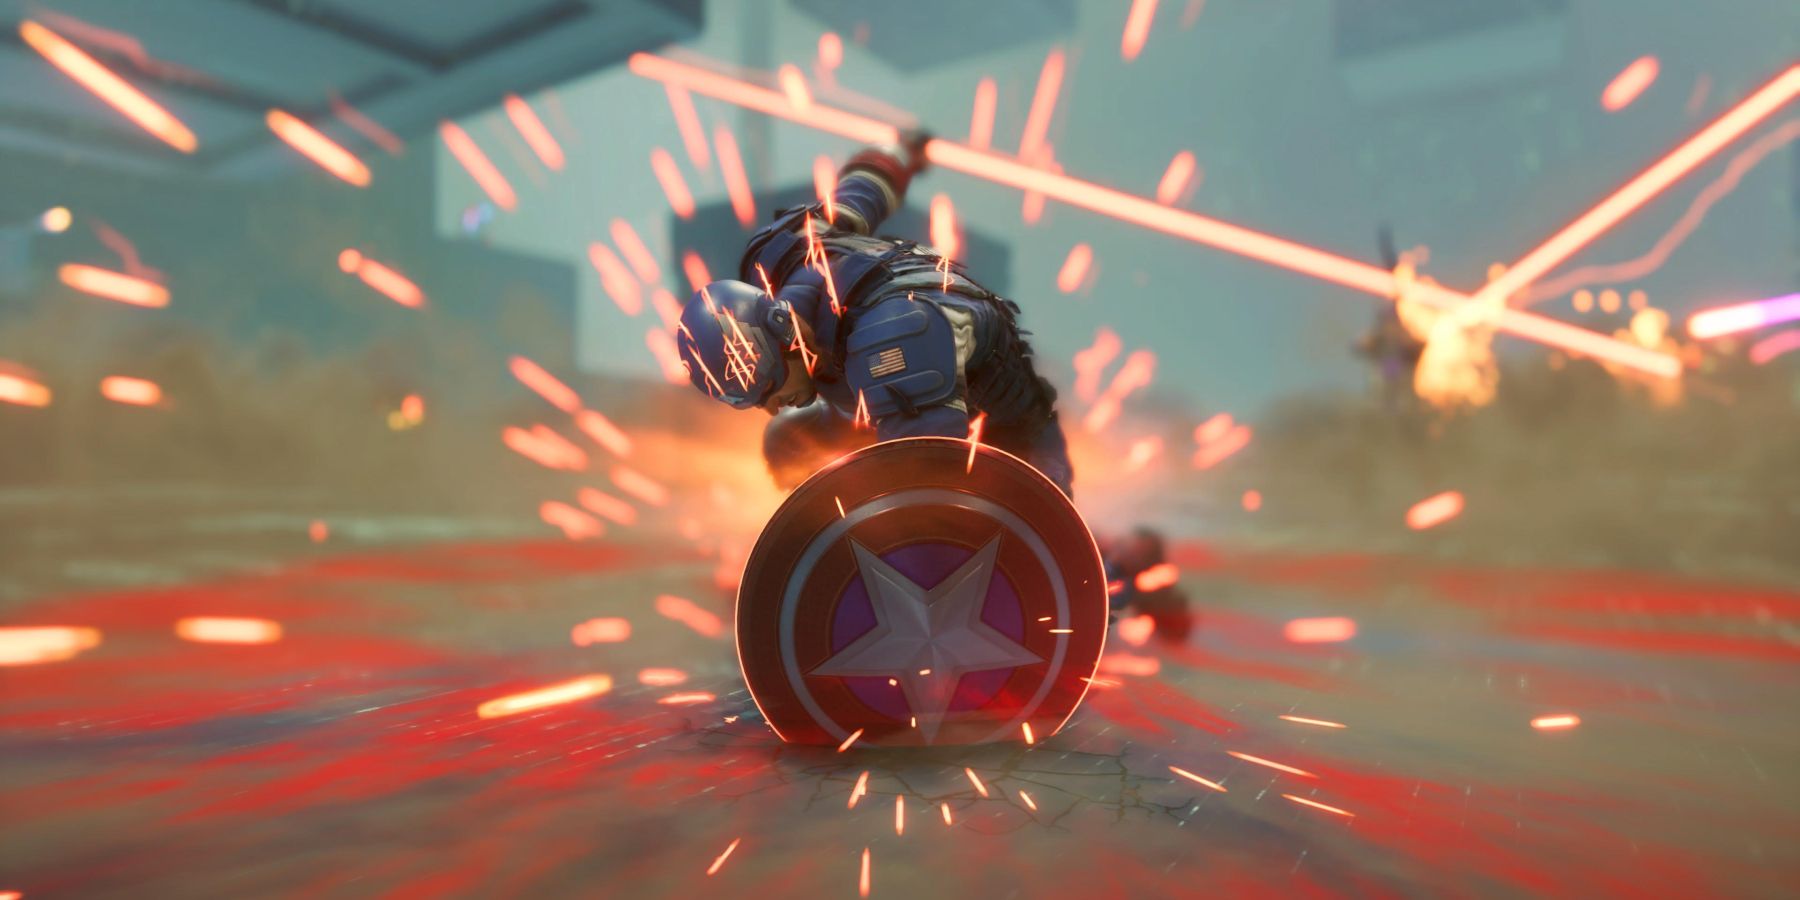 Captain America activating his Brooklyn Brawler ability in Marvel's Avengers